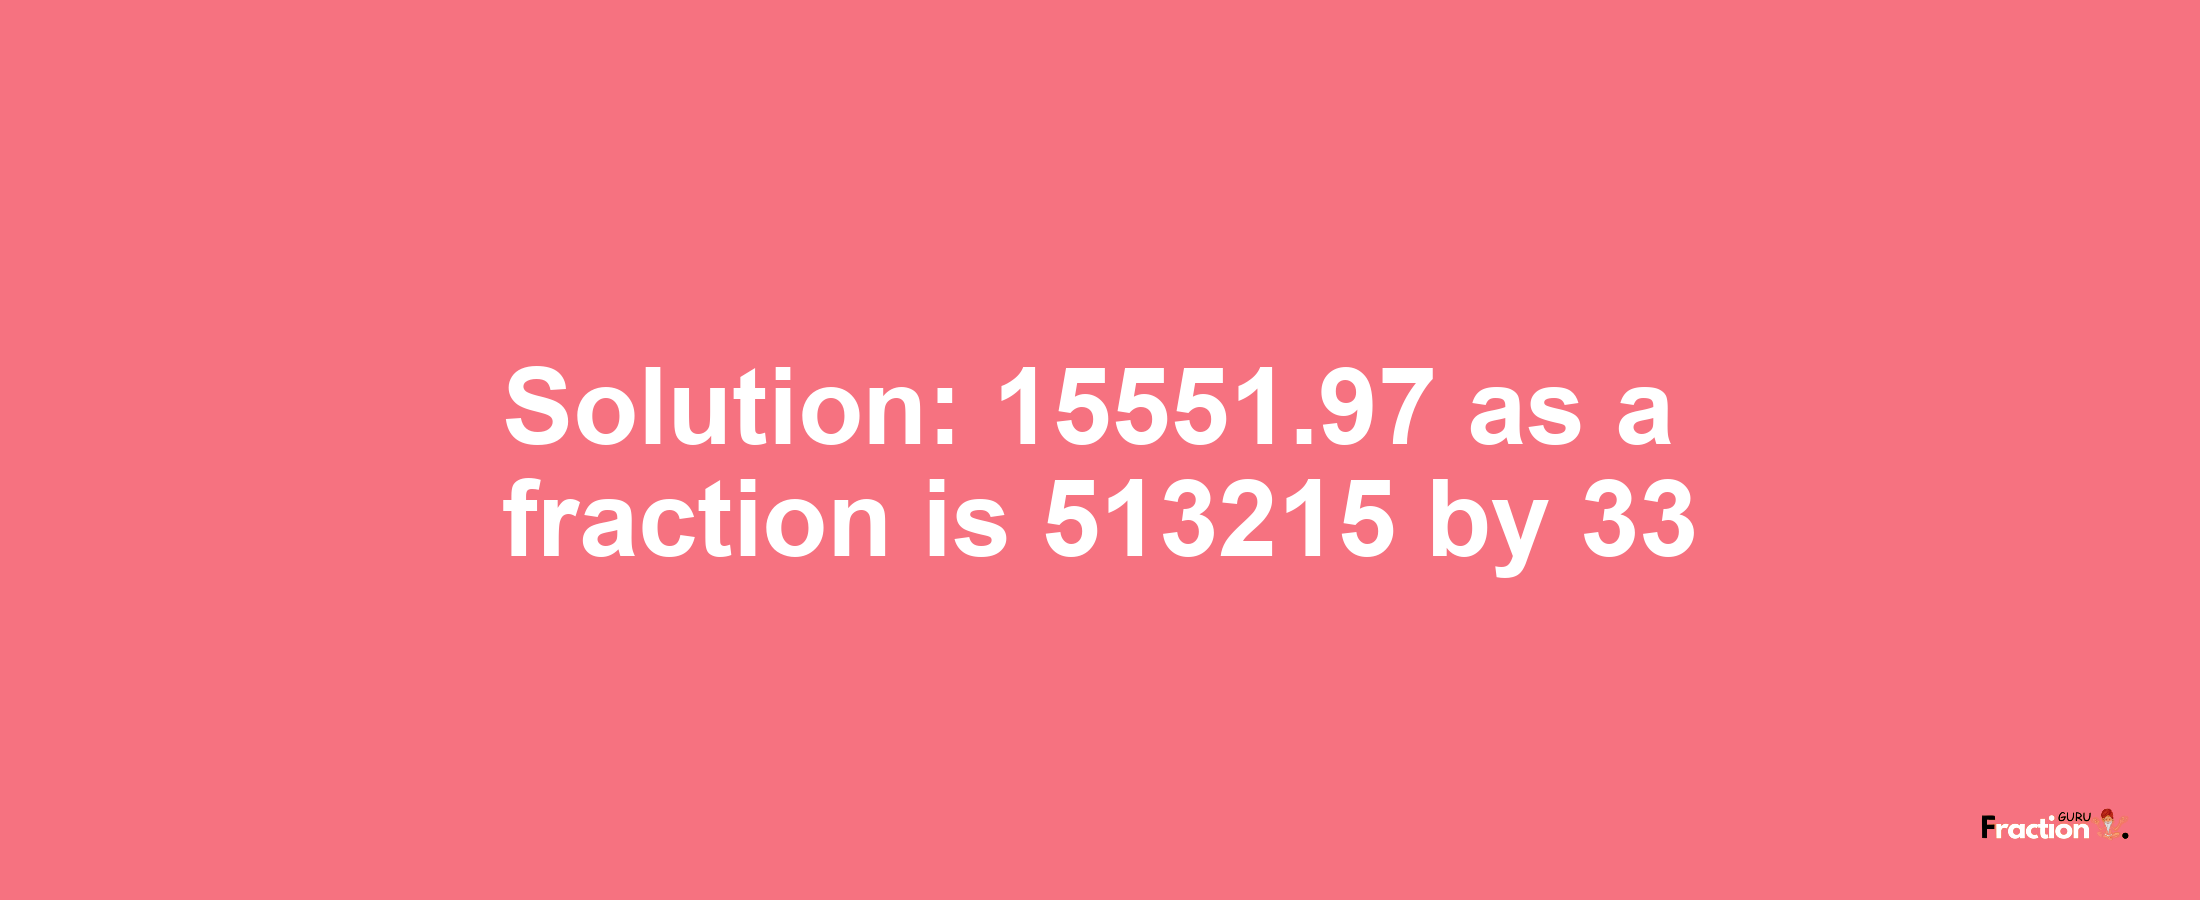 Solution:15551.97 as a fraction is 513215/33